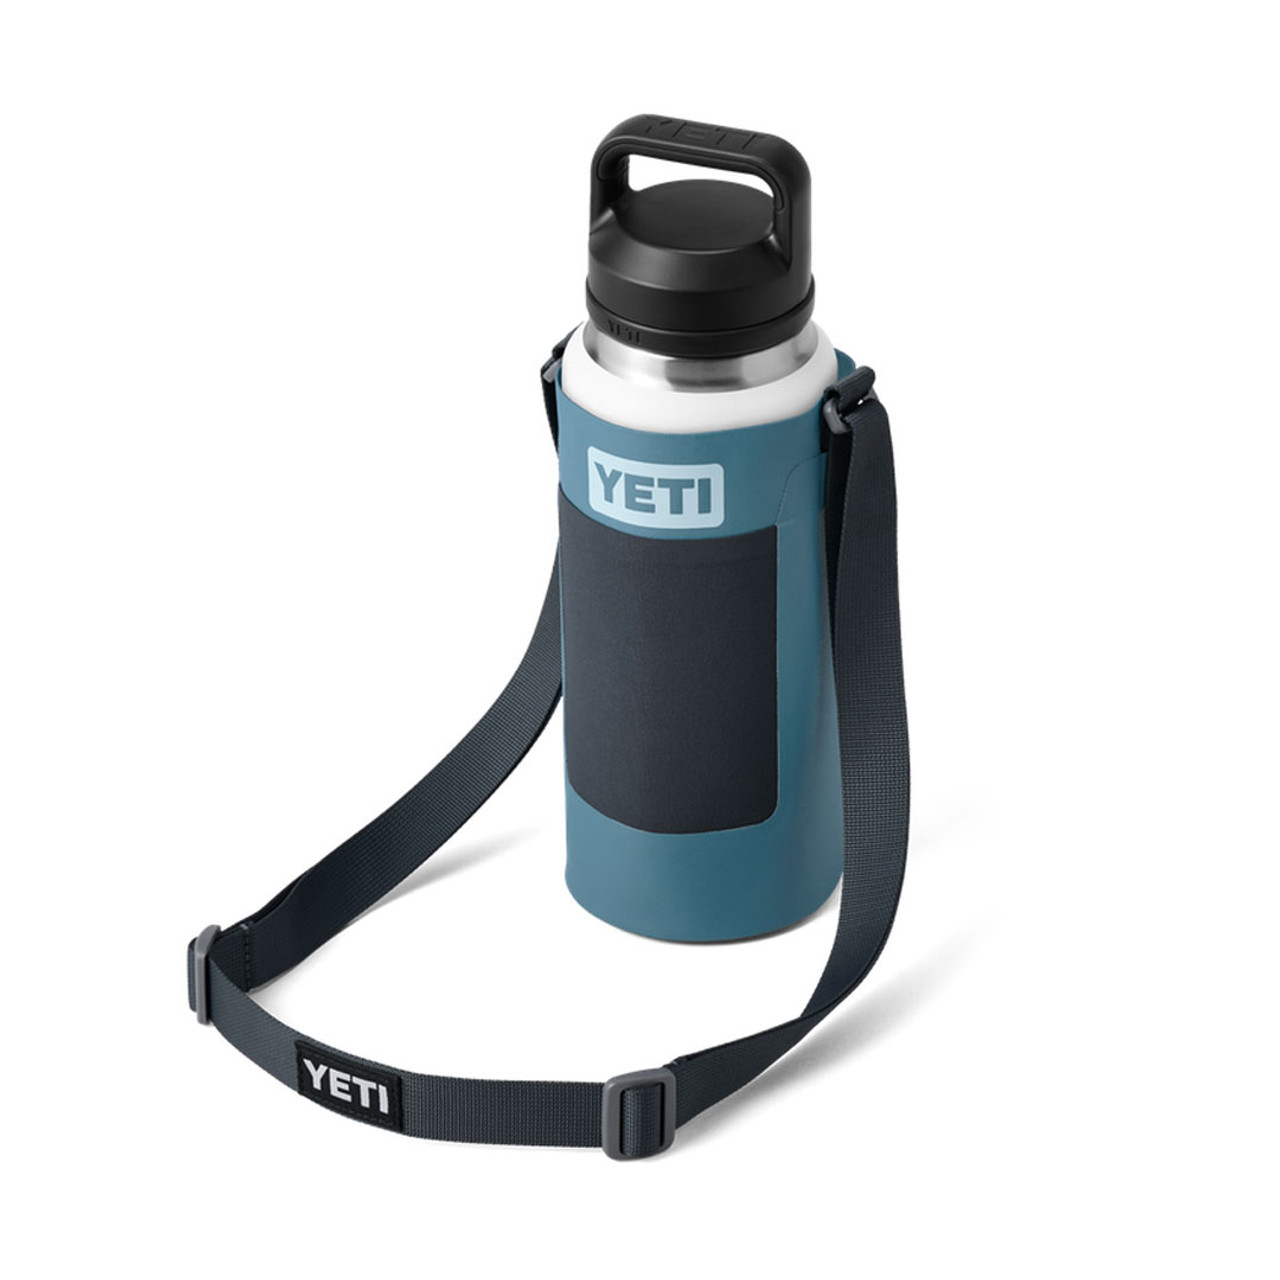 https://cdn11.bigcommerce.com/s-ppsyskcavg/images/stencil/1280x1280/products/59448/197089/W-site_studio_Drinkware_accessories_Large_Bottle_Sling_Nordic_Blue_3qtr_Bottle_1947_Primary_B_2400x2400__43200.1657564383.jpg?c=2?imbypass=on